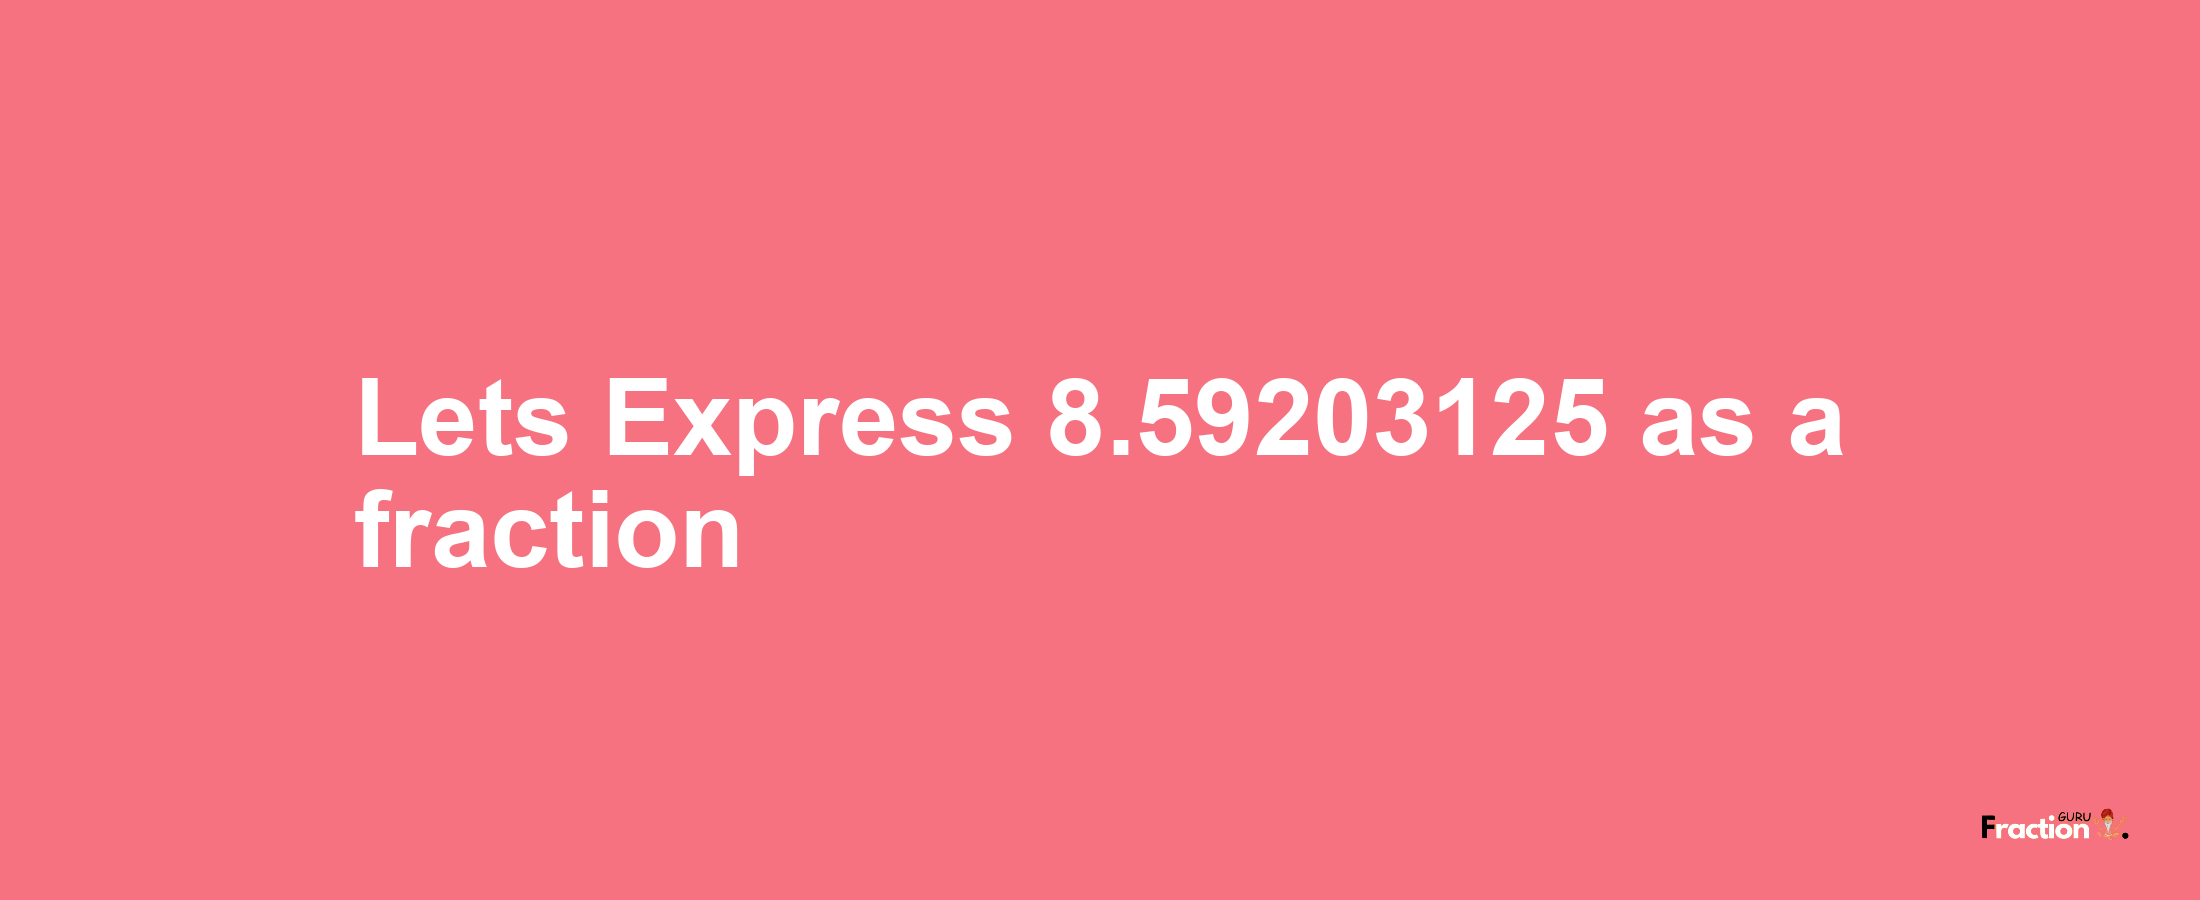 Lets Express 8.59203125 as afraction